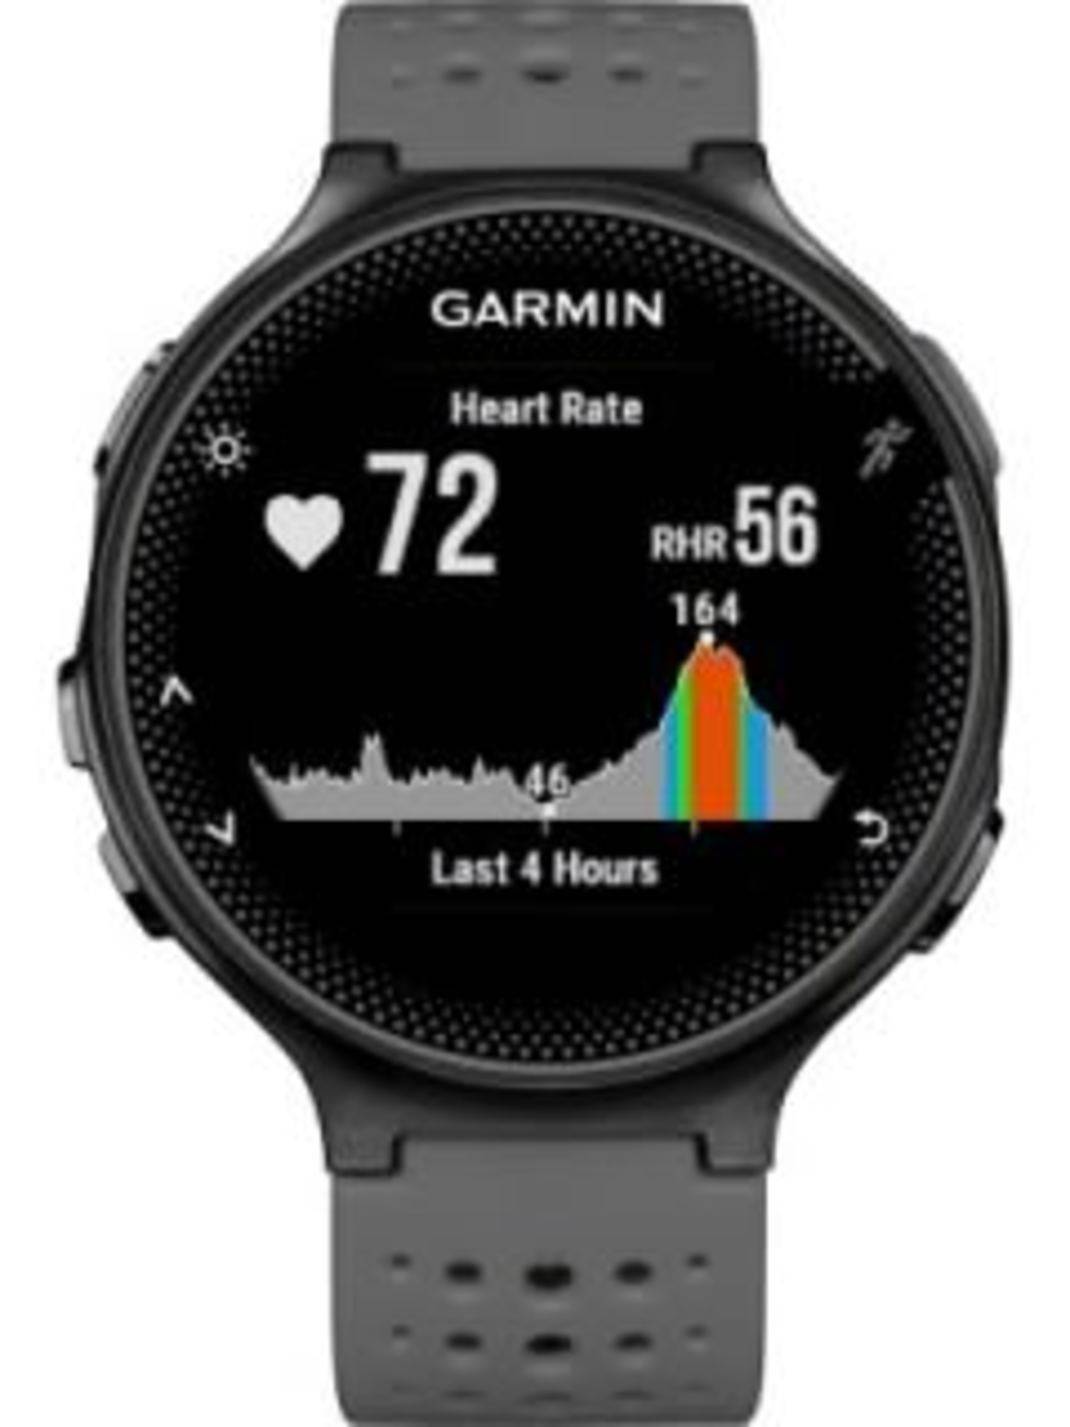 Compare Garmin Forerunner 235 vs Garmin Forerunner - Garmin Forerunner 235 vs Garmin Forerunner 735XT Comparison by Price, Specifications, Reviews &amp; | Gadgets Now